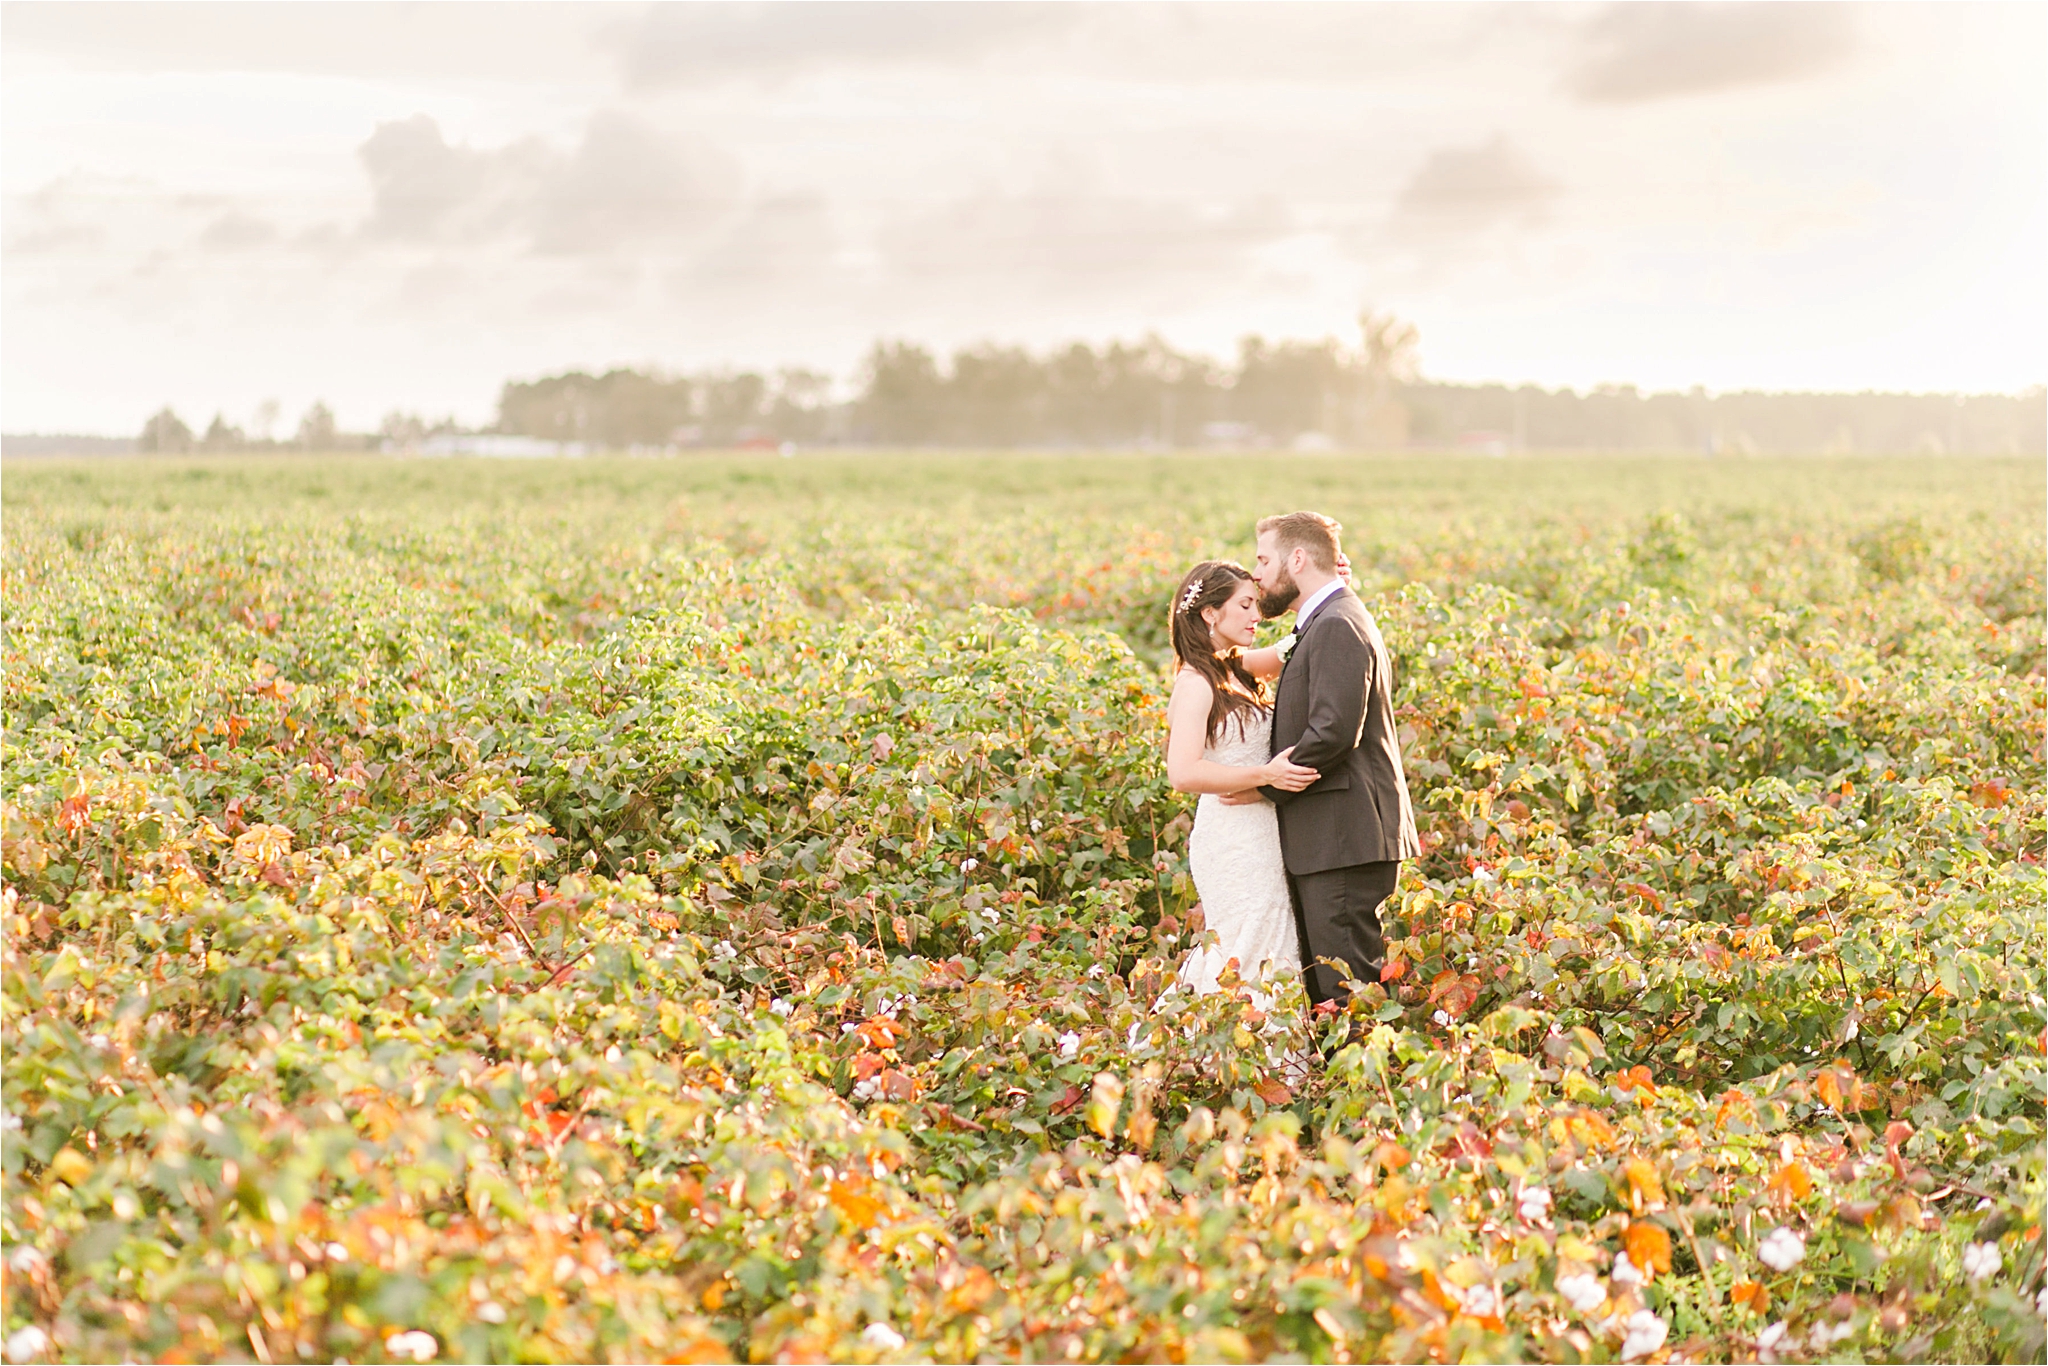 bride and groom photos-wedding day-venue departure-off into the sunset-cotton field-whimsical